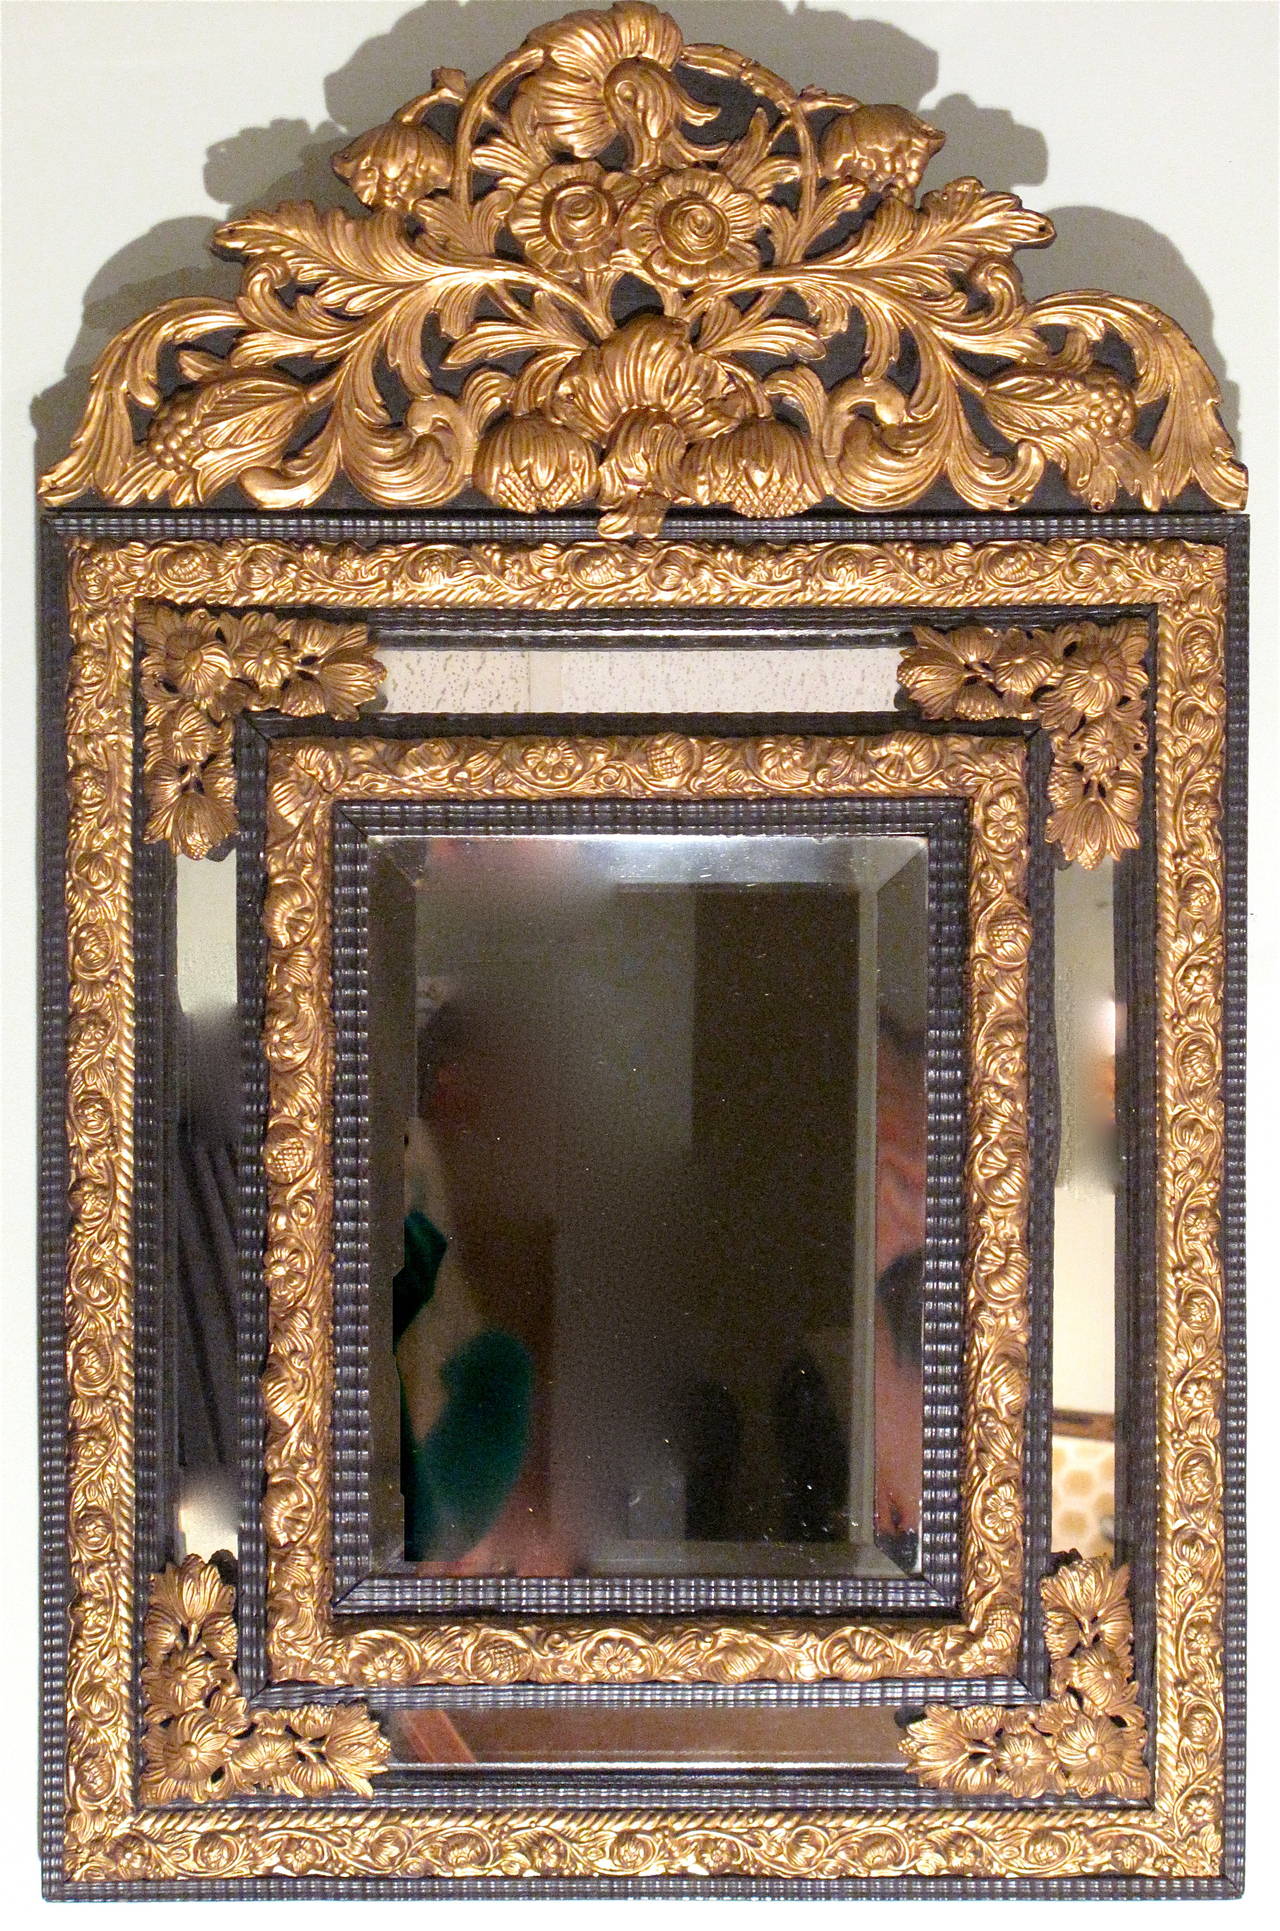 A stylish Continental ebonized and gilt brass repoussé crested cushion mirror, 19th century. The arched crest is composed of bold foliate and floral elements, the layered ripple carved frame accented with band of gadrooned and foliate repoussé.